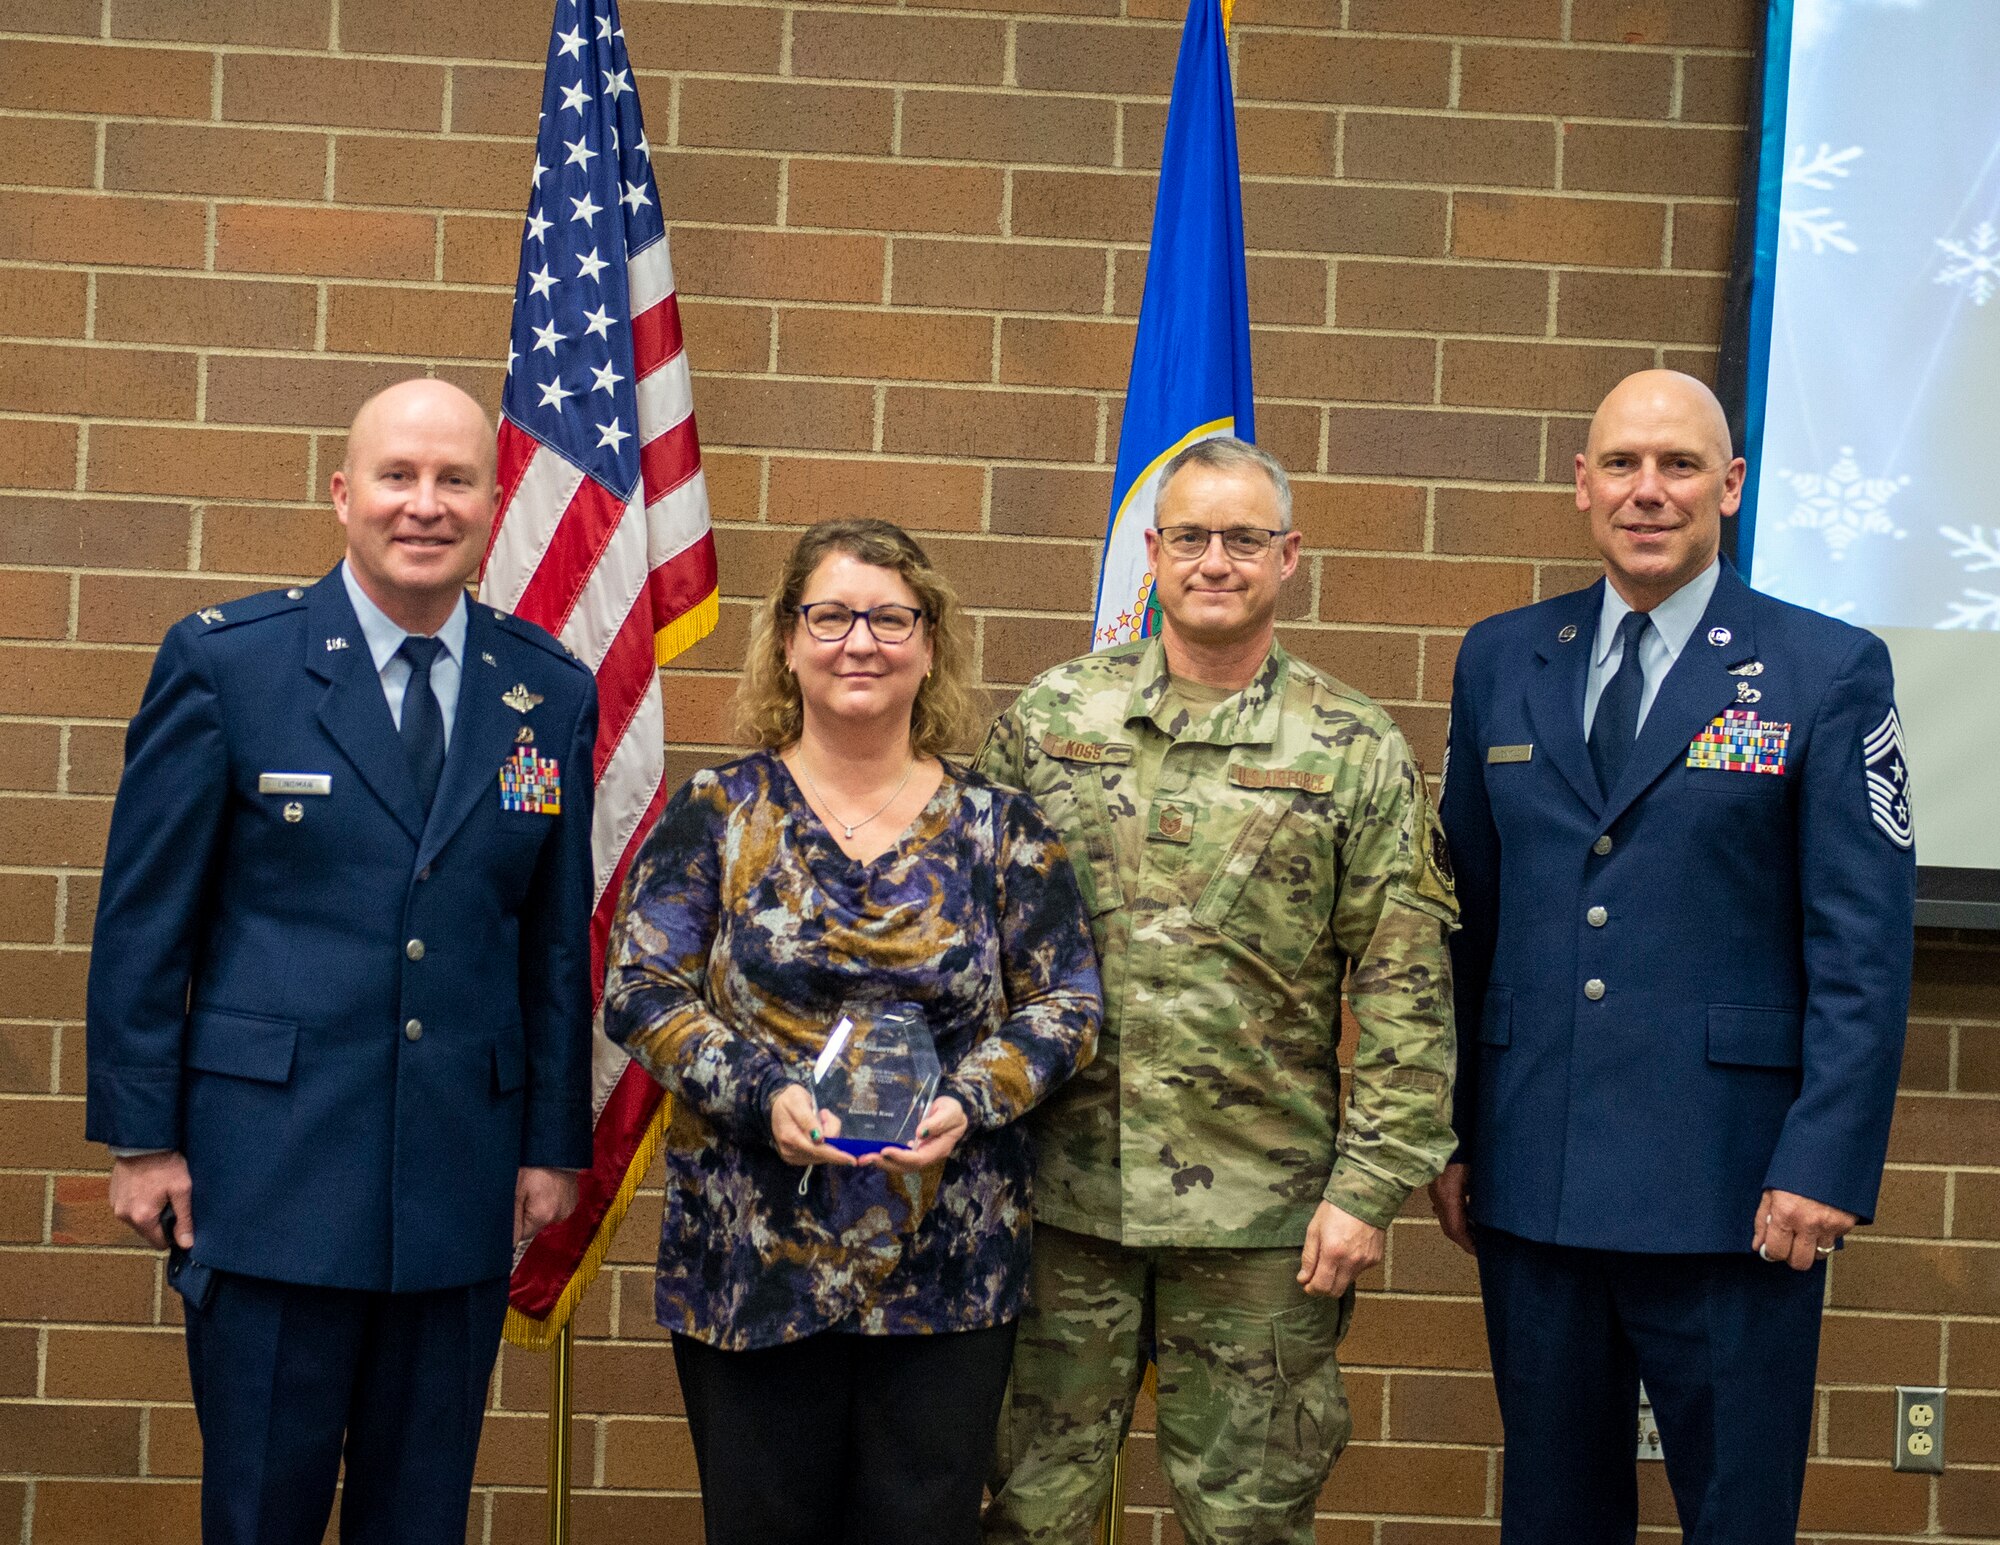 U.S. Air Force Airmen from the 133rd Airlift Wing, along with friends and family attend the 2021 Wing Awards Ceremony in St. Paul, Minn., Dec. 11, 2021.